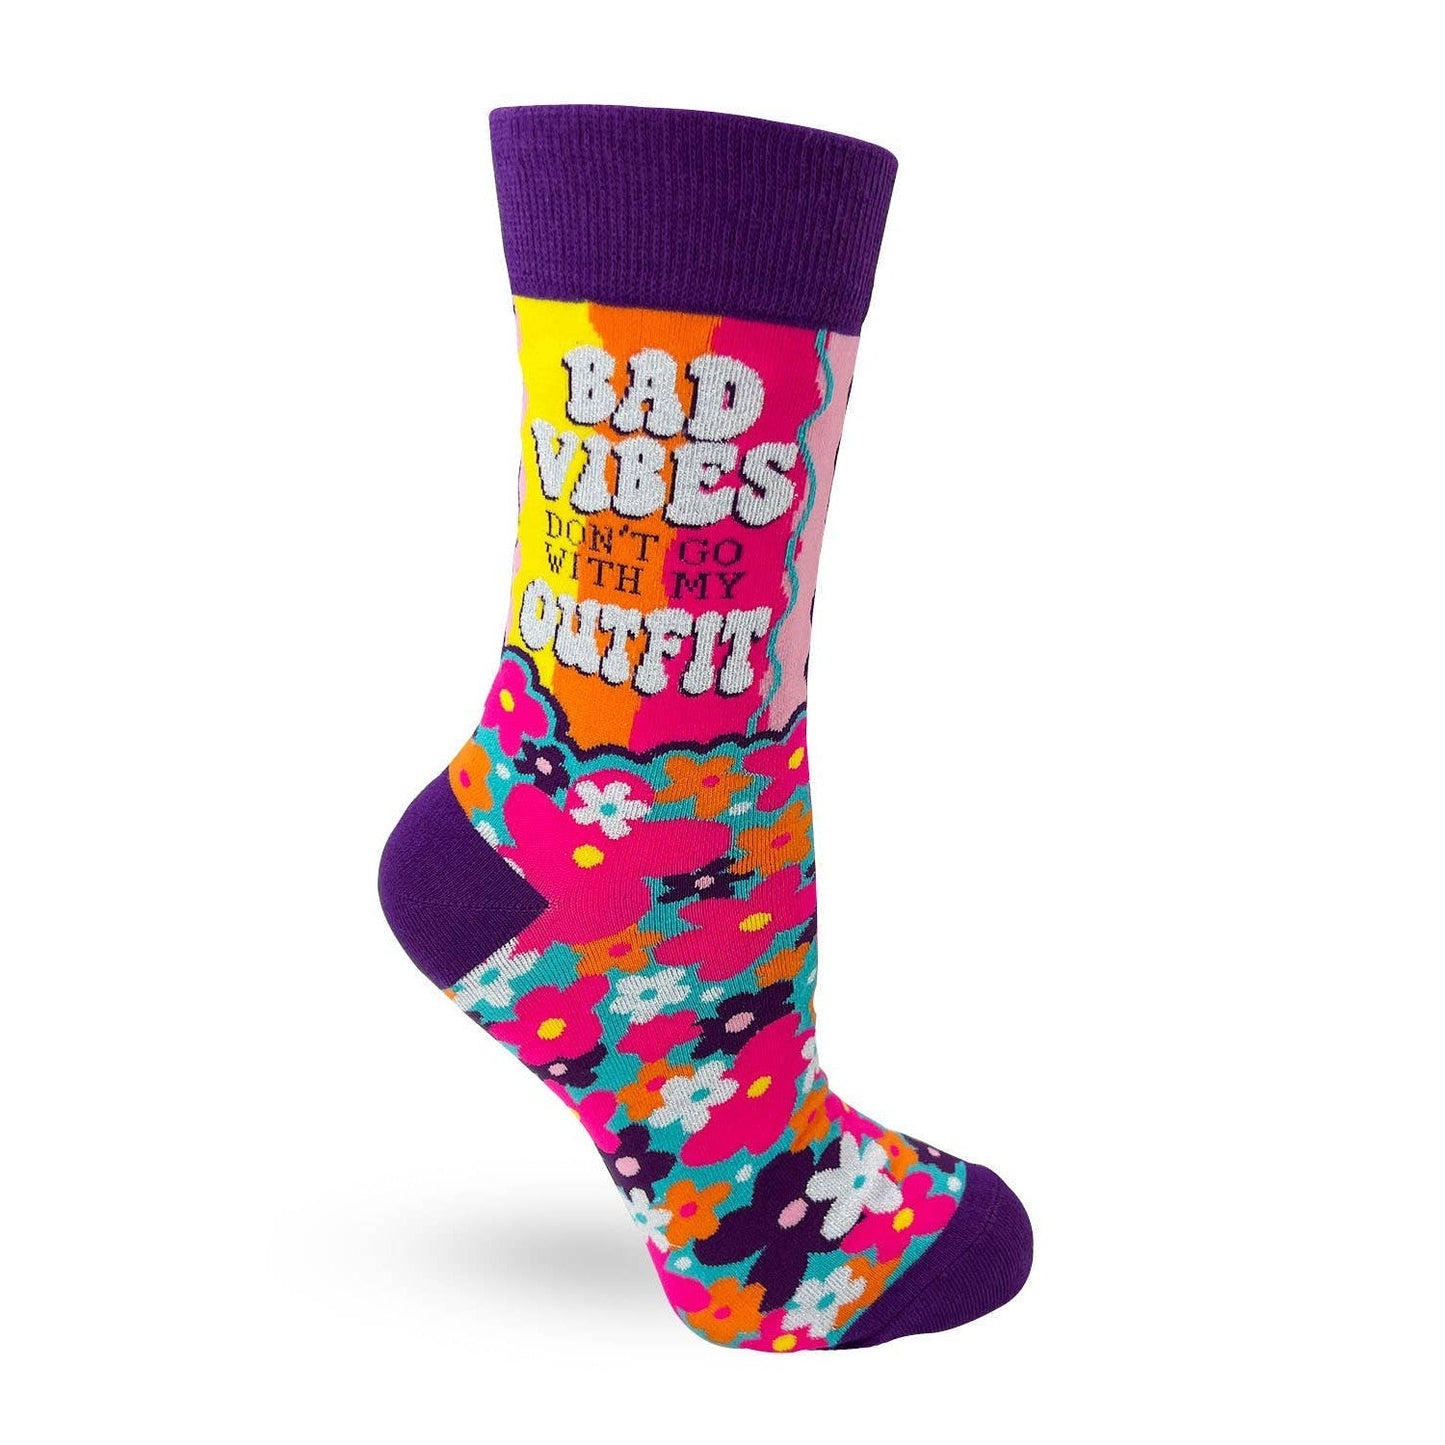 Bad Vibes Don't Go With My Outfit Women's Crew Socks | Retro Flower Pattern